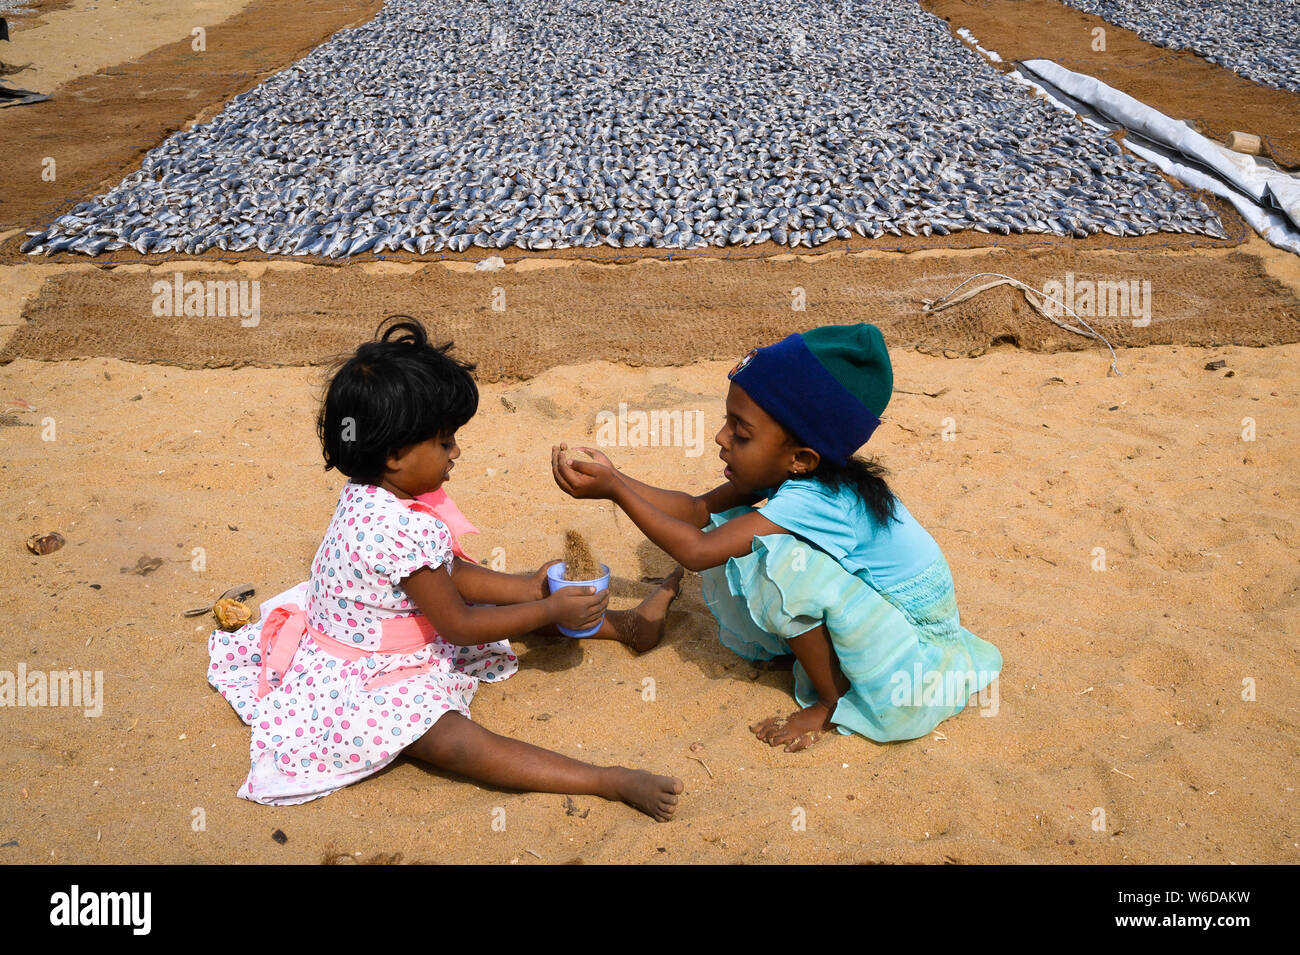 Children playing in the sand by drying fish at the Negombo Fish Market Complex, Negombo, Sri Lanka. Stock Photo